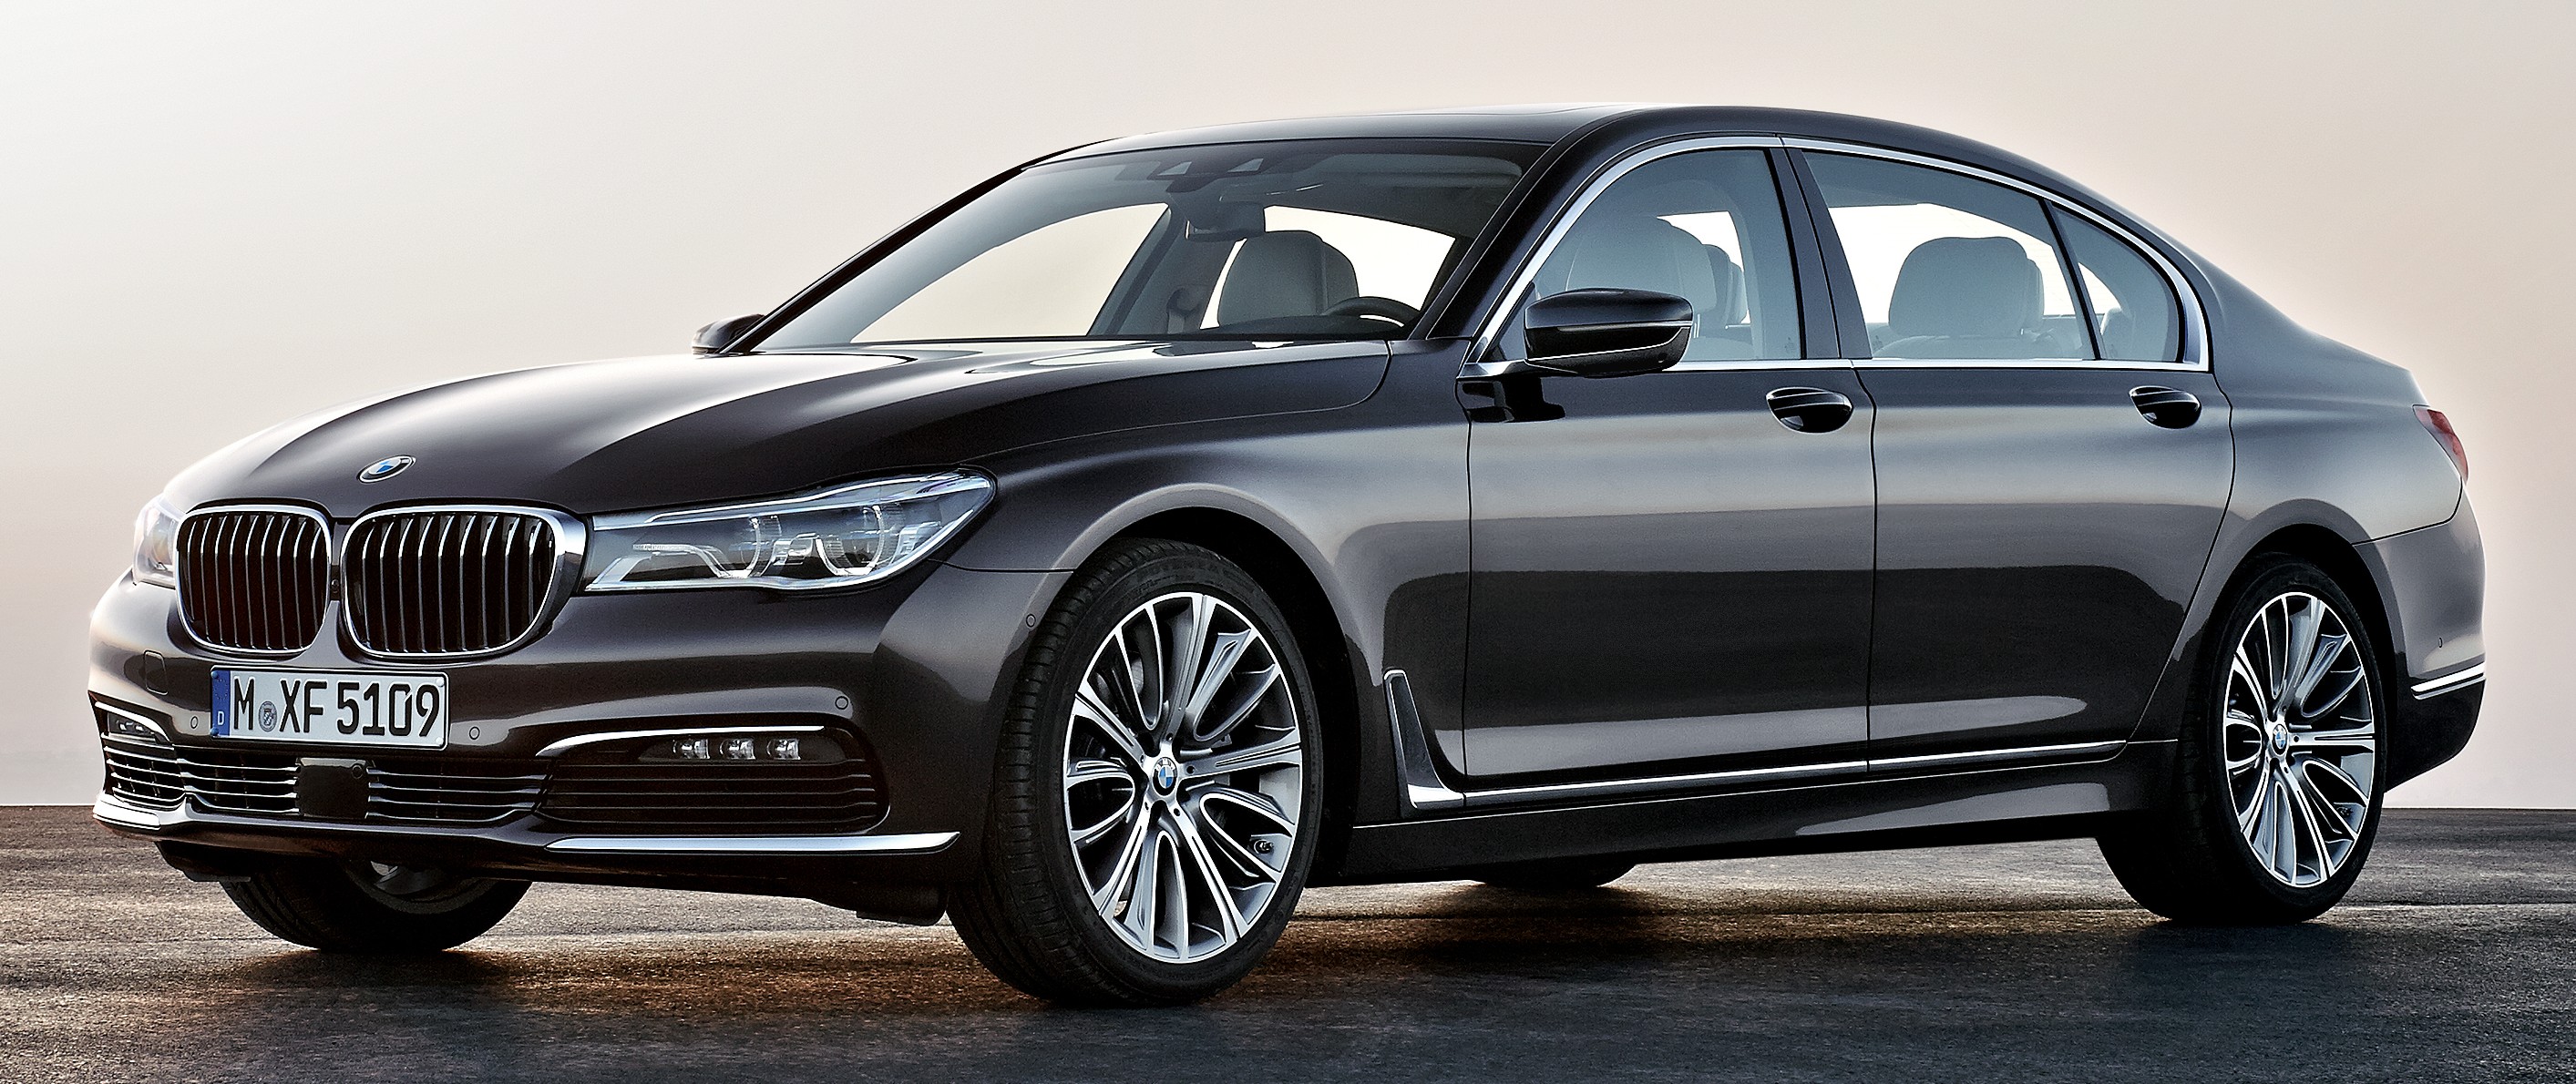 G11/G12 BMW 7 Series officially unveiled full details